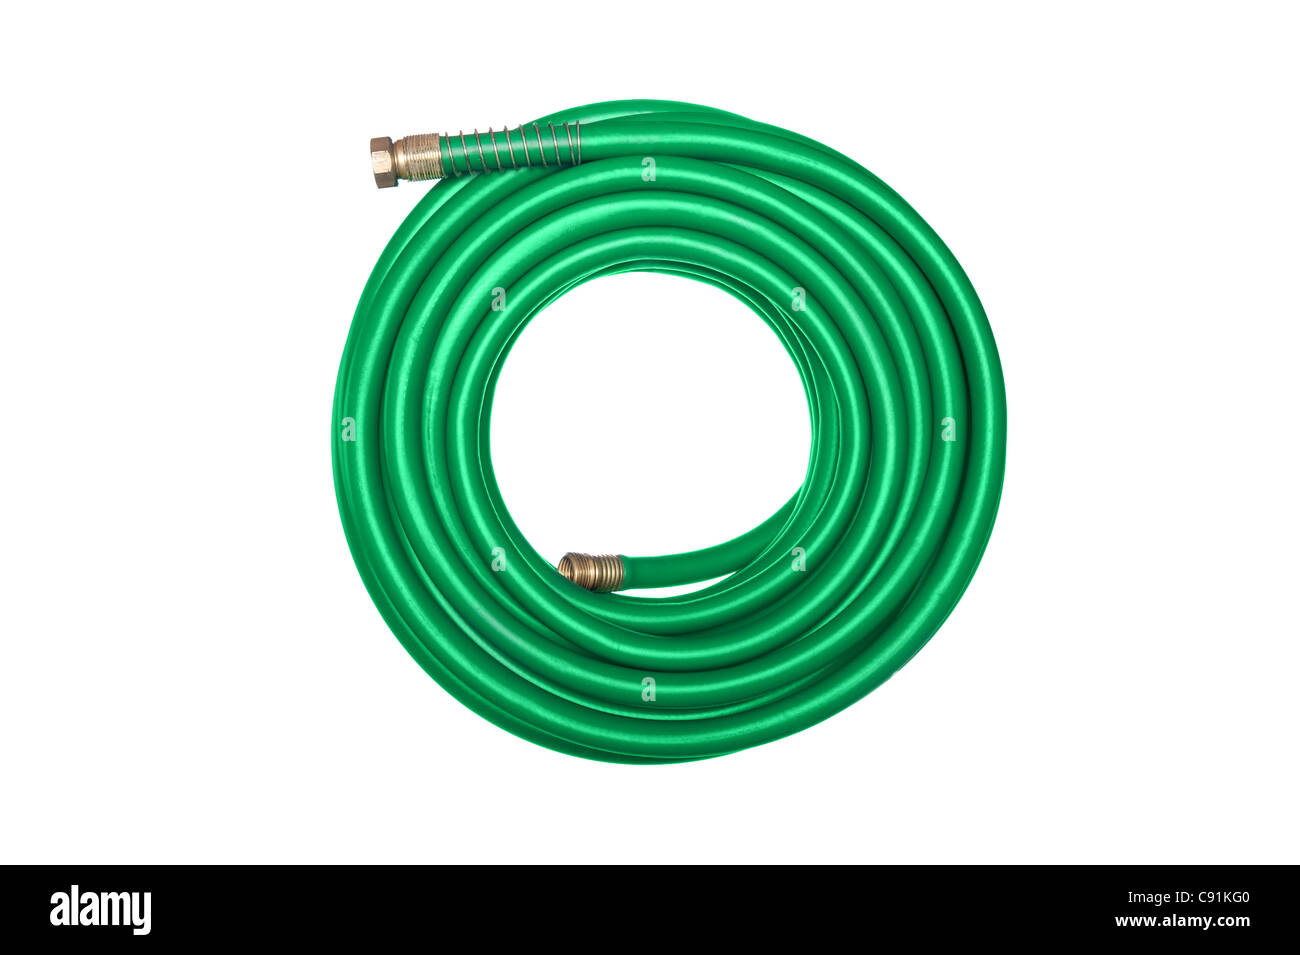 A new green coiled rubber hose isolated on white. Stock Photo